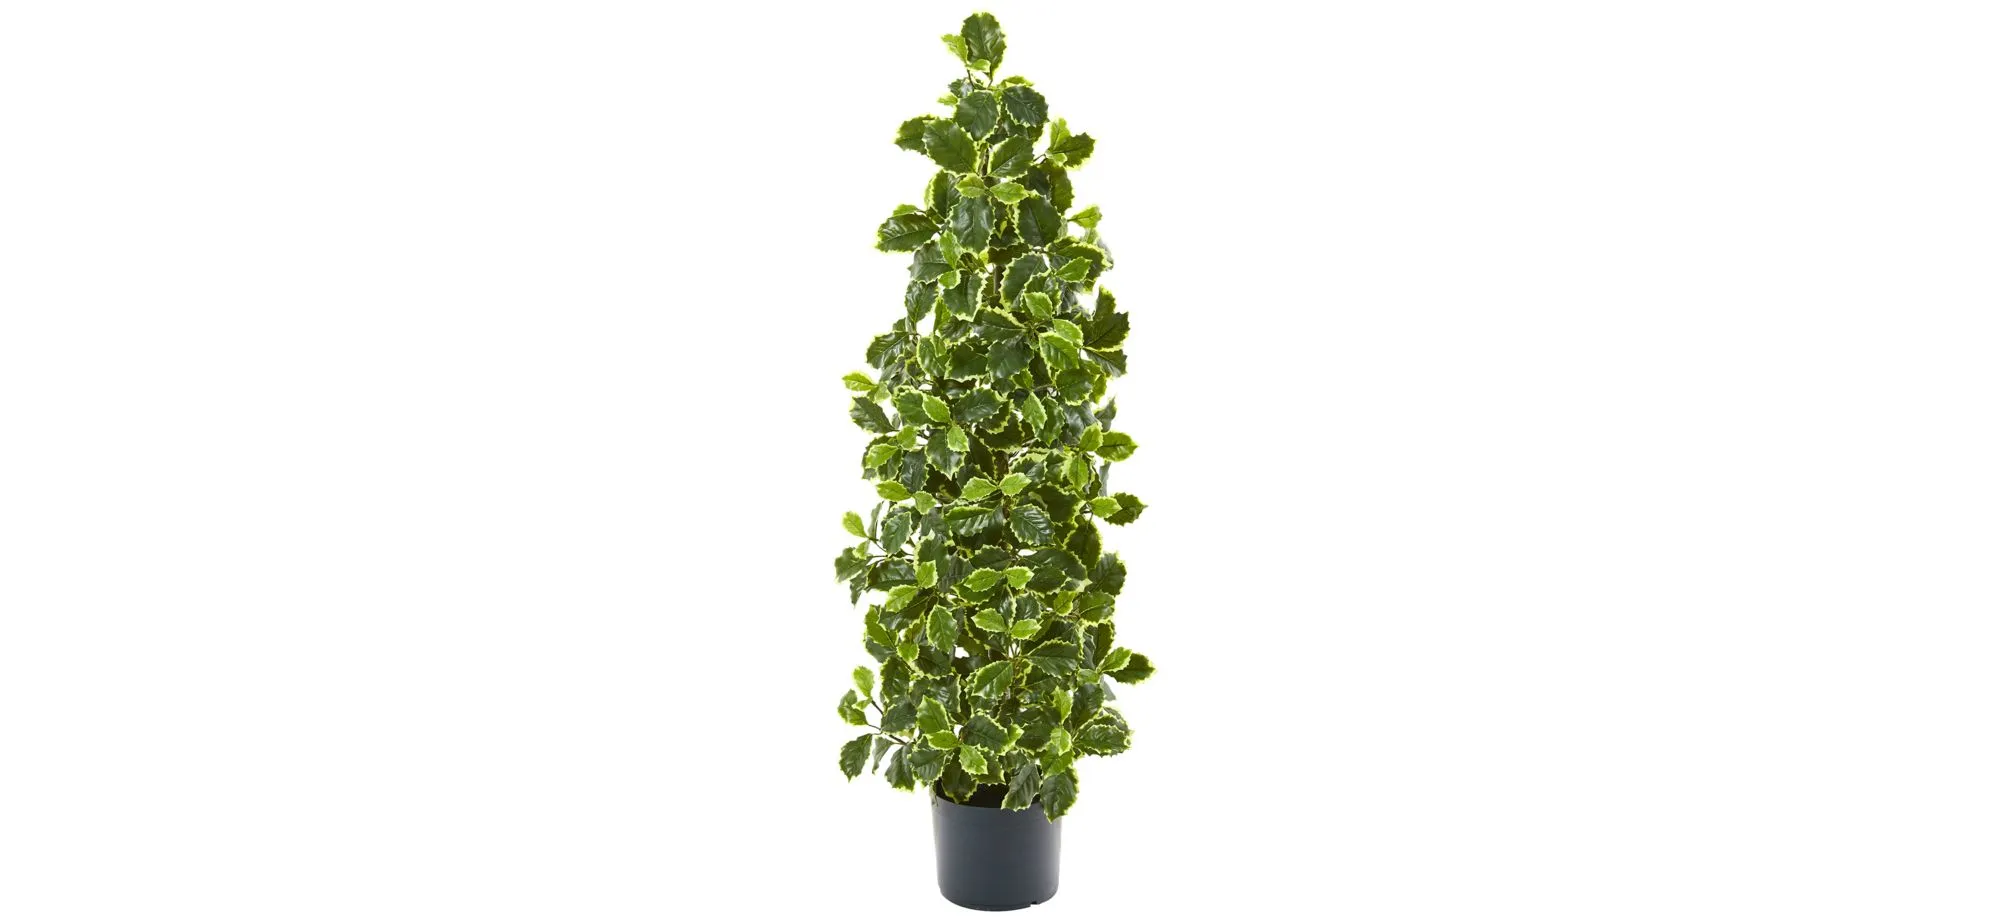 39" Variegated Holly Leaf Artificial Tree in Green by Bellanest